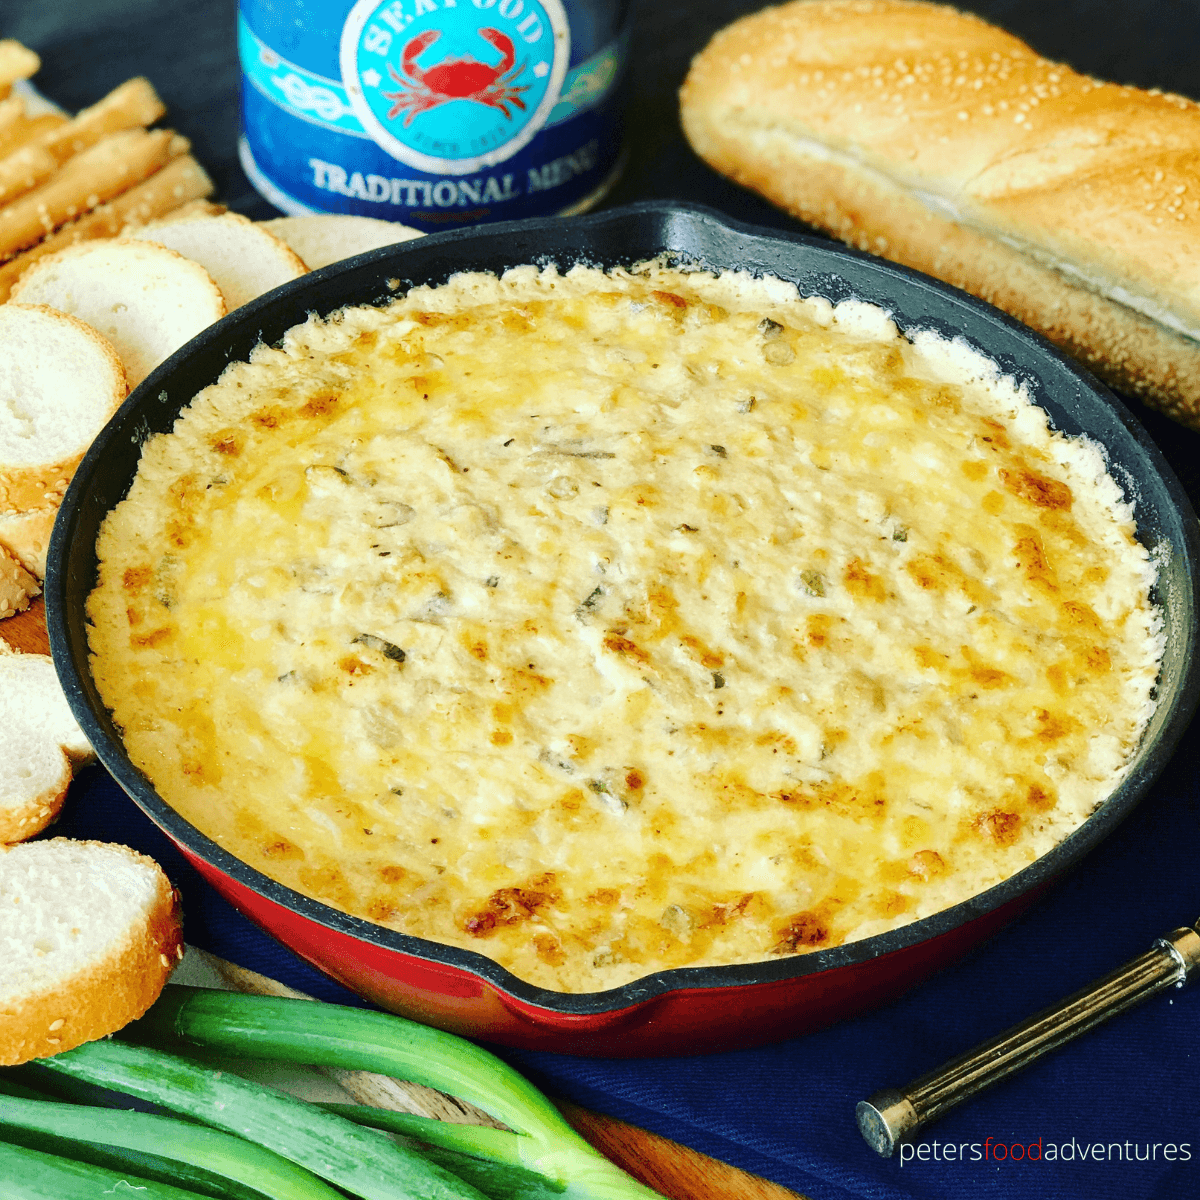 Hot Baked Crab and Artichoke Dip, Super Cheesy! Easy to make, leaving you wanting more. The perfect appetizer for party food! Crab Artichoke Dip